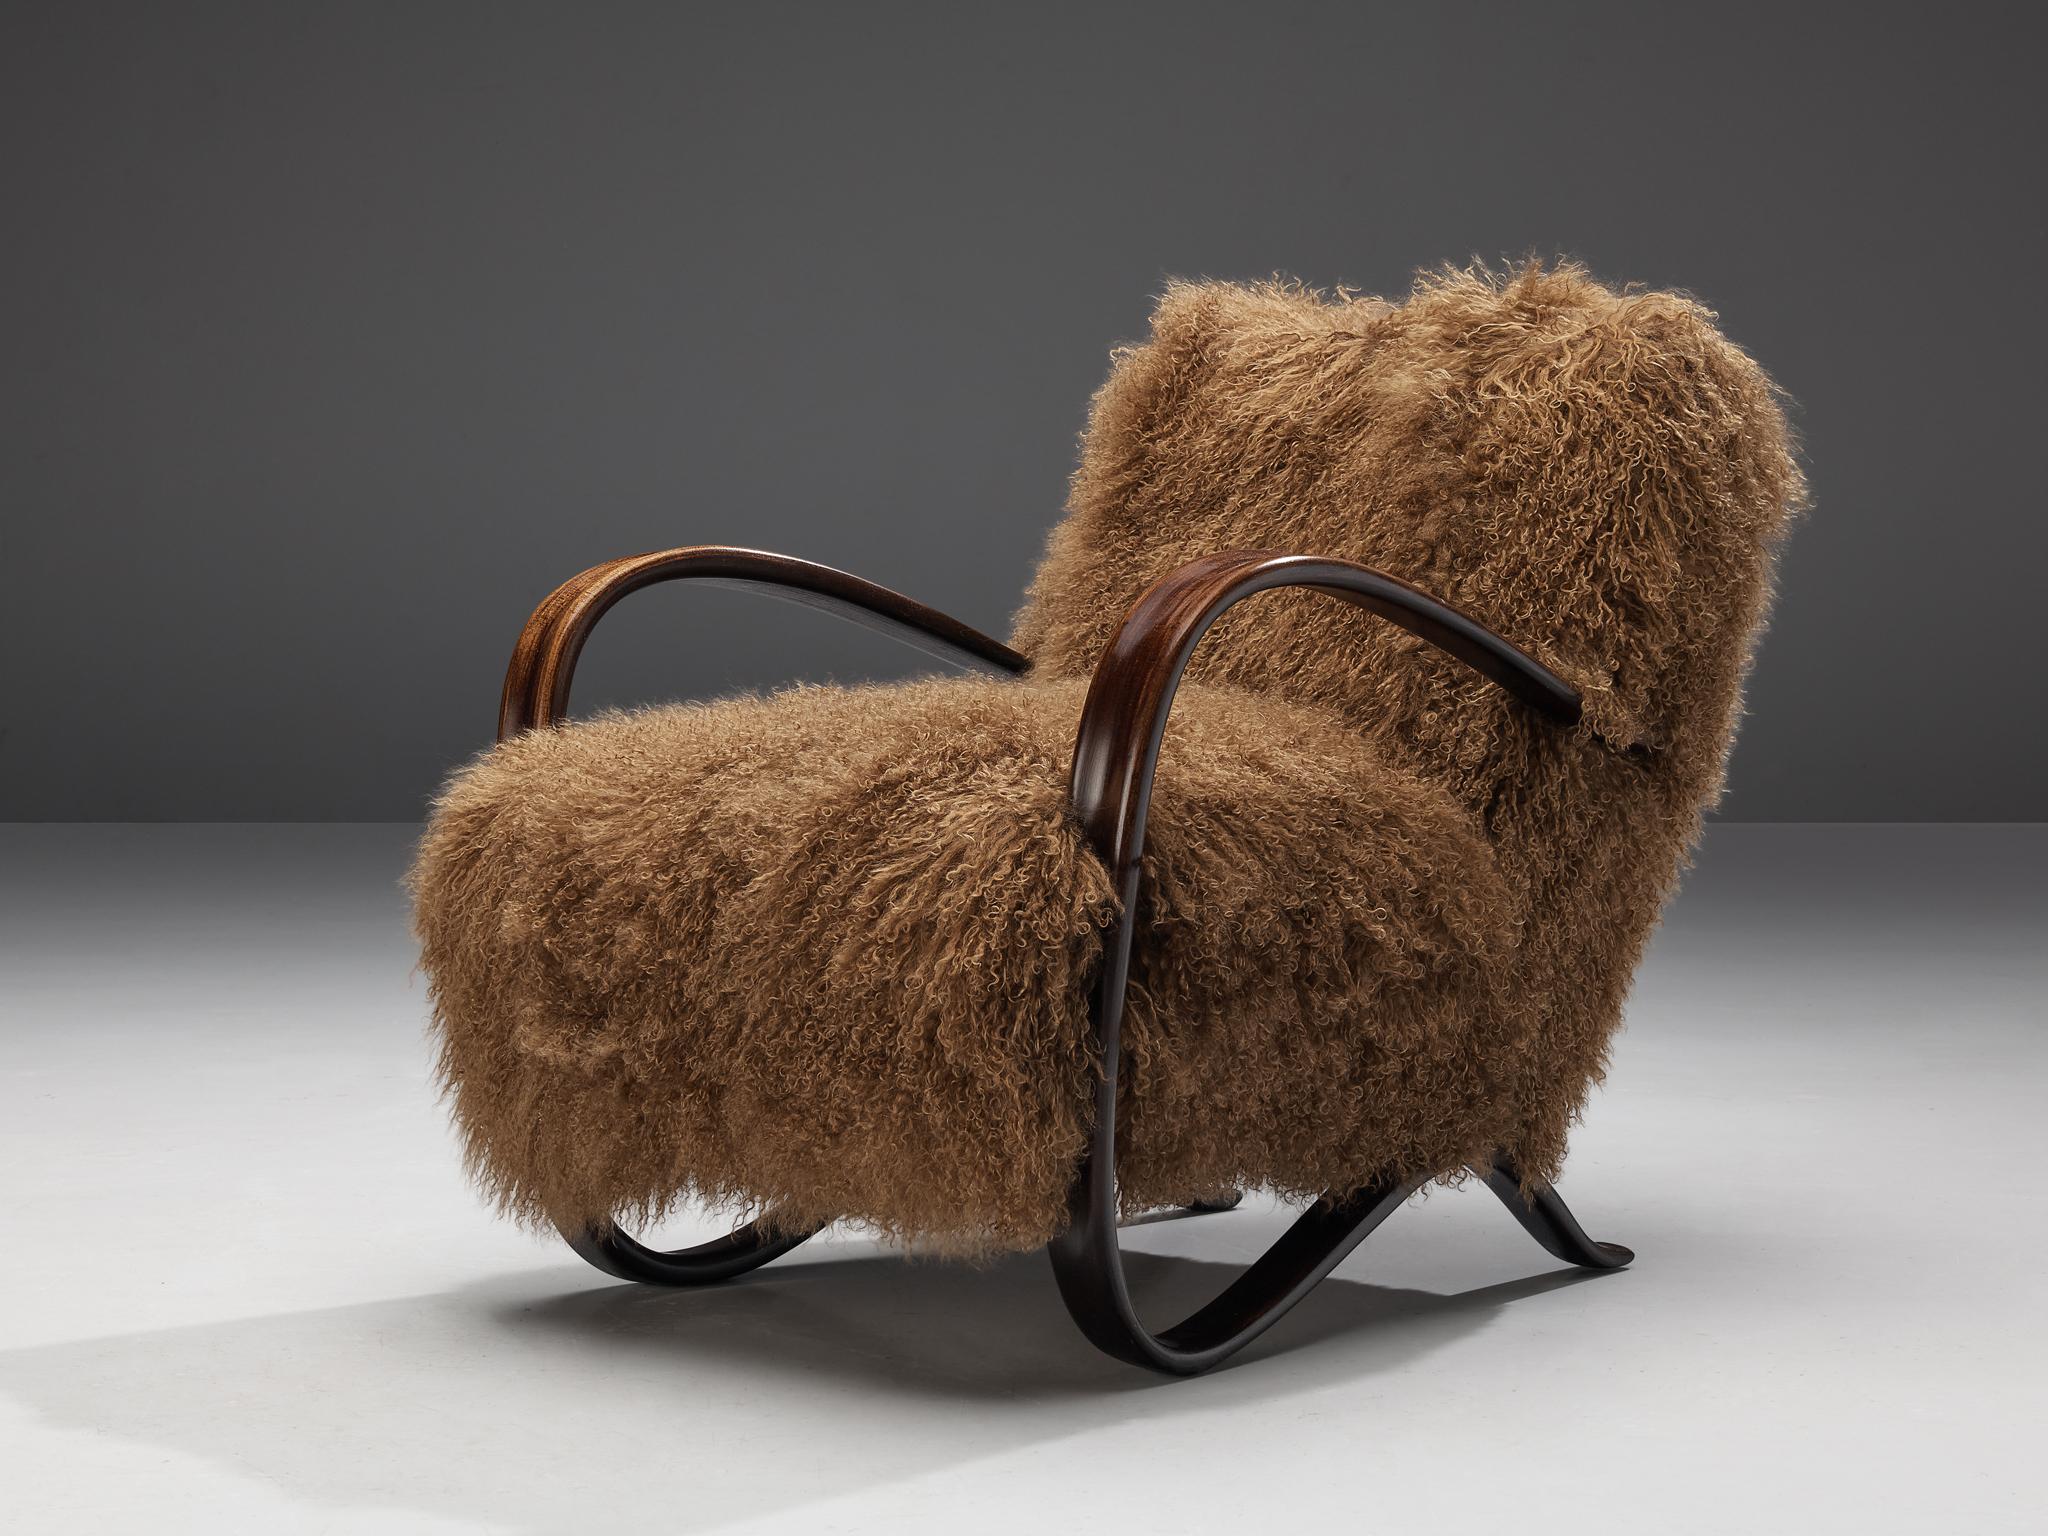 Jindrich Halabala, lounge chair, model 'H269', stained beech, Tibetan lambswool, Czech Republic, 1930s.

Extraordinary easy chair in brown Tibetan lambswool upholstery. This design has a very dynamic and abundant appearance and the fuzzy upholstery